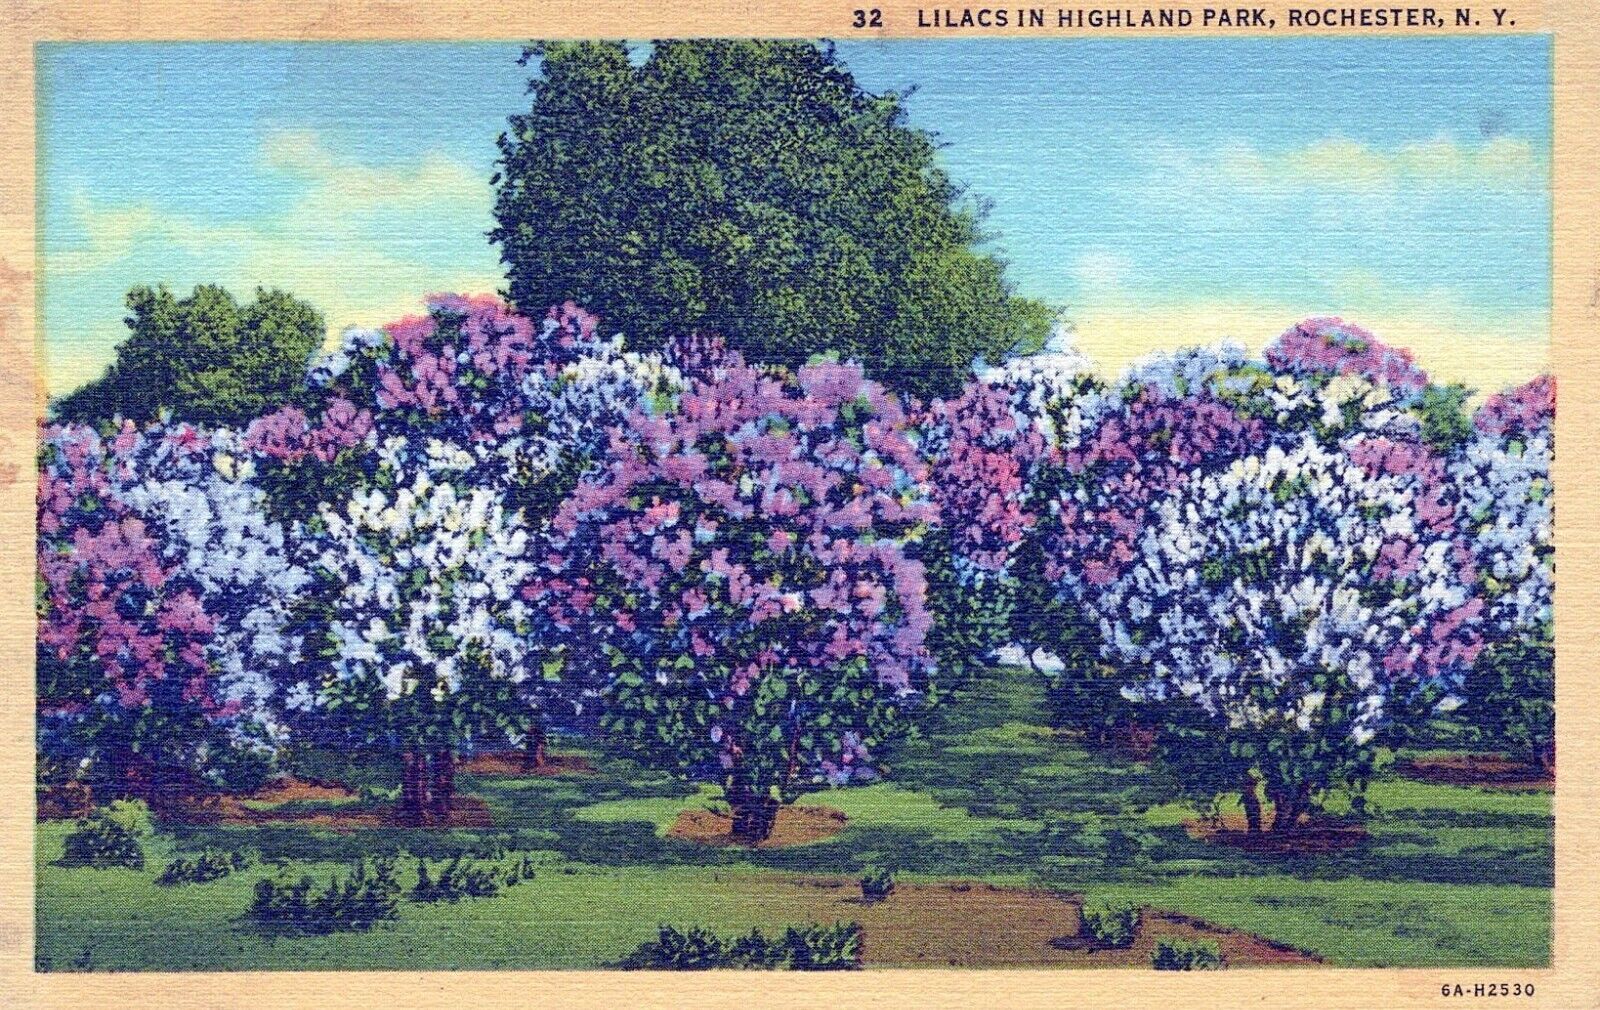 Rochester New York Lilacs in Highland Park Postcard